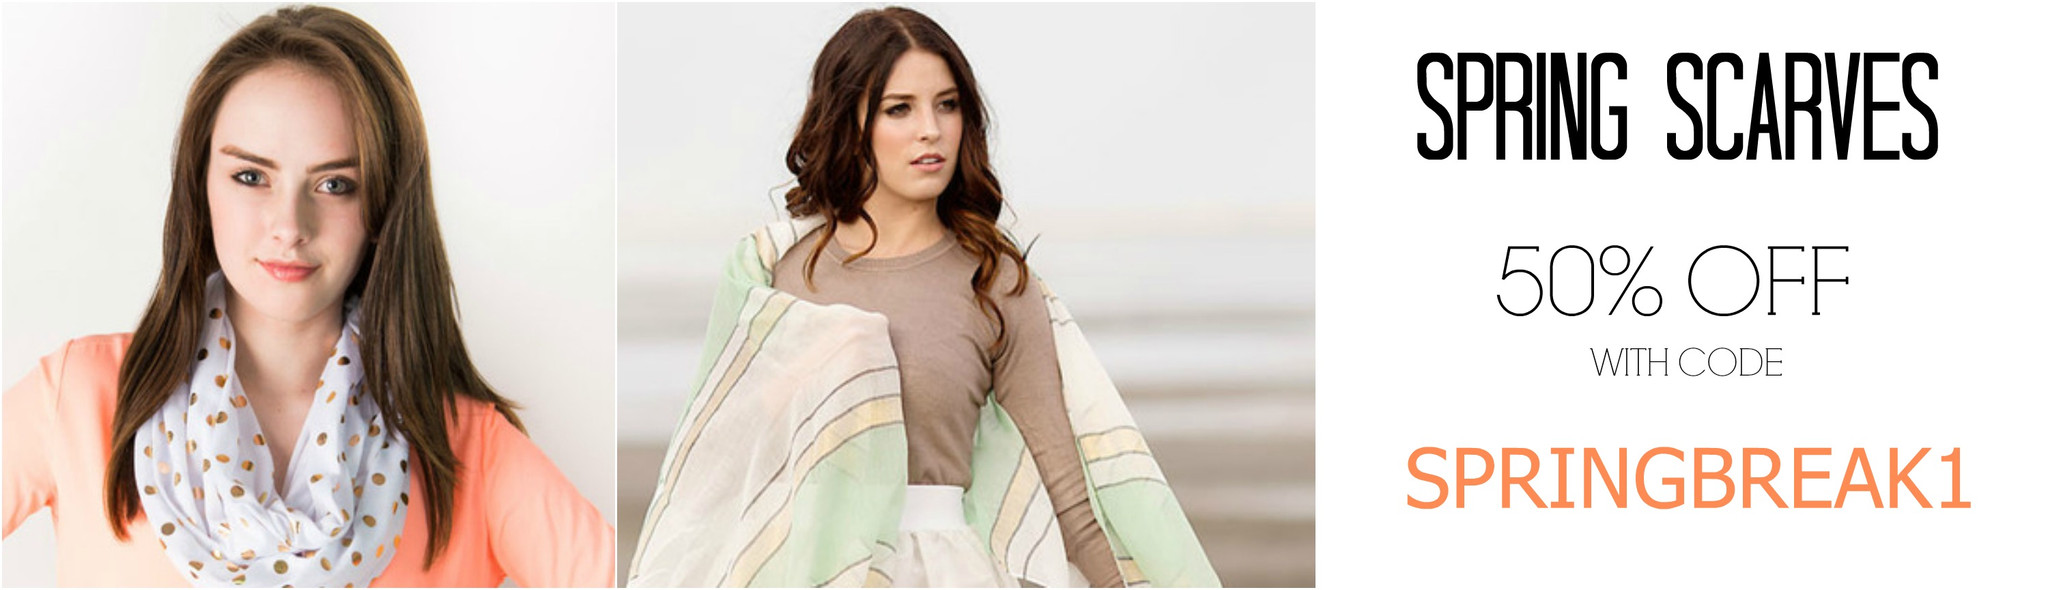 50% Off Spring Scarves | Prices From $7.48!